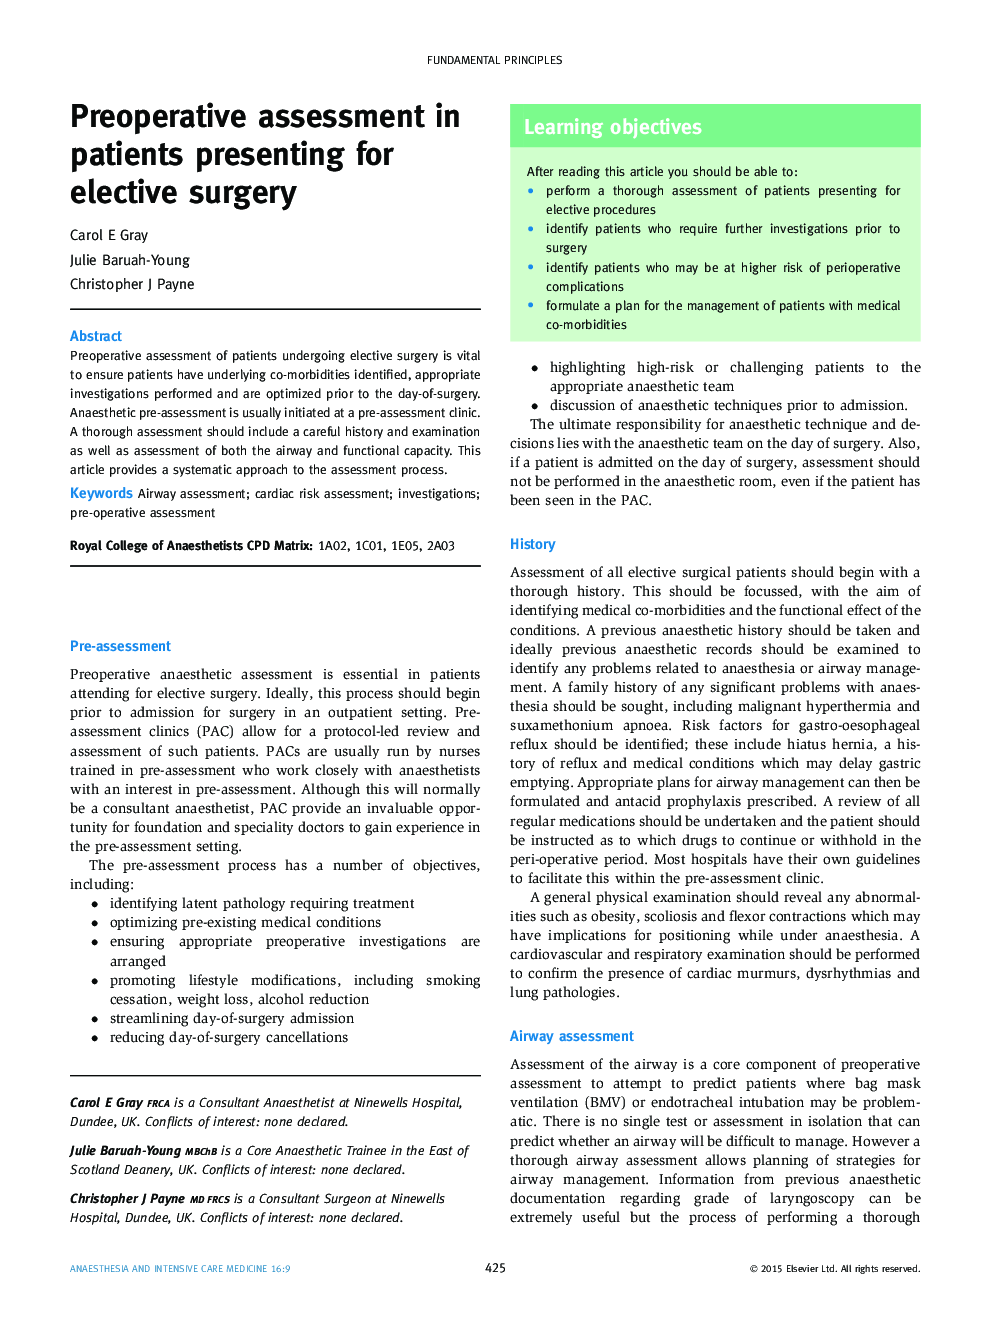 Preoperative assessment in patients presenting for elective surgery